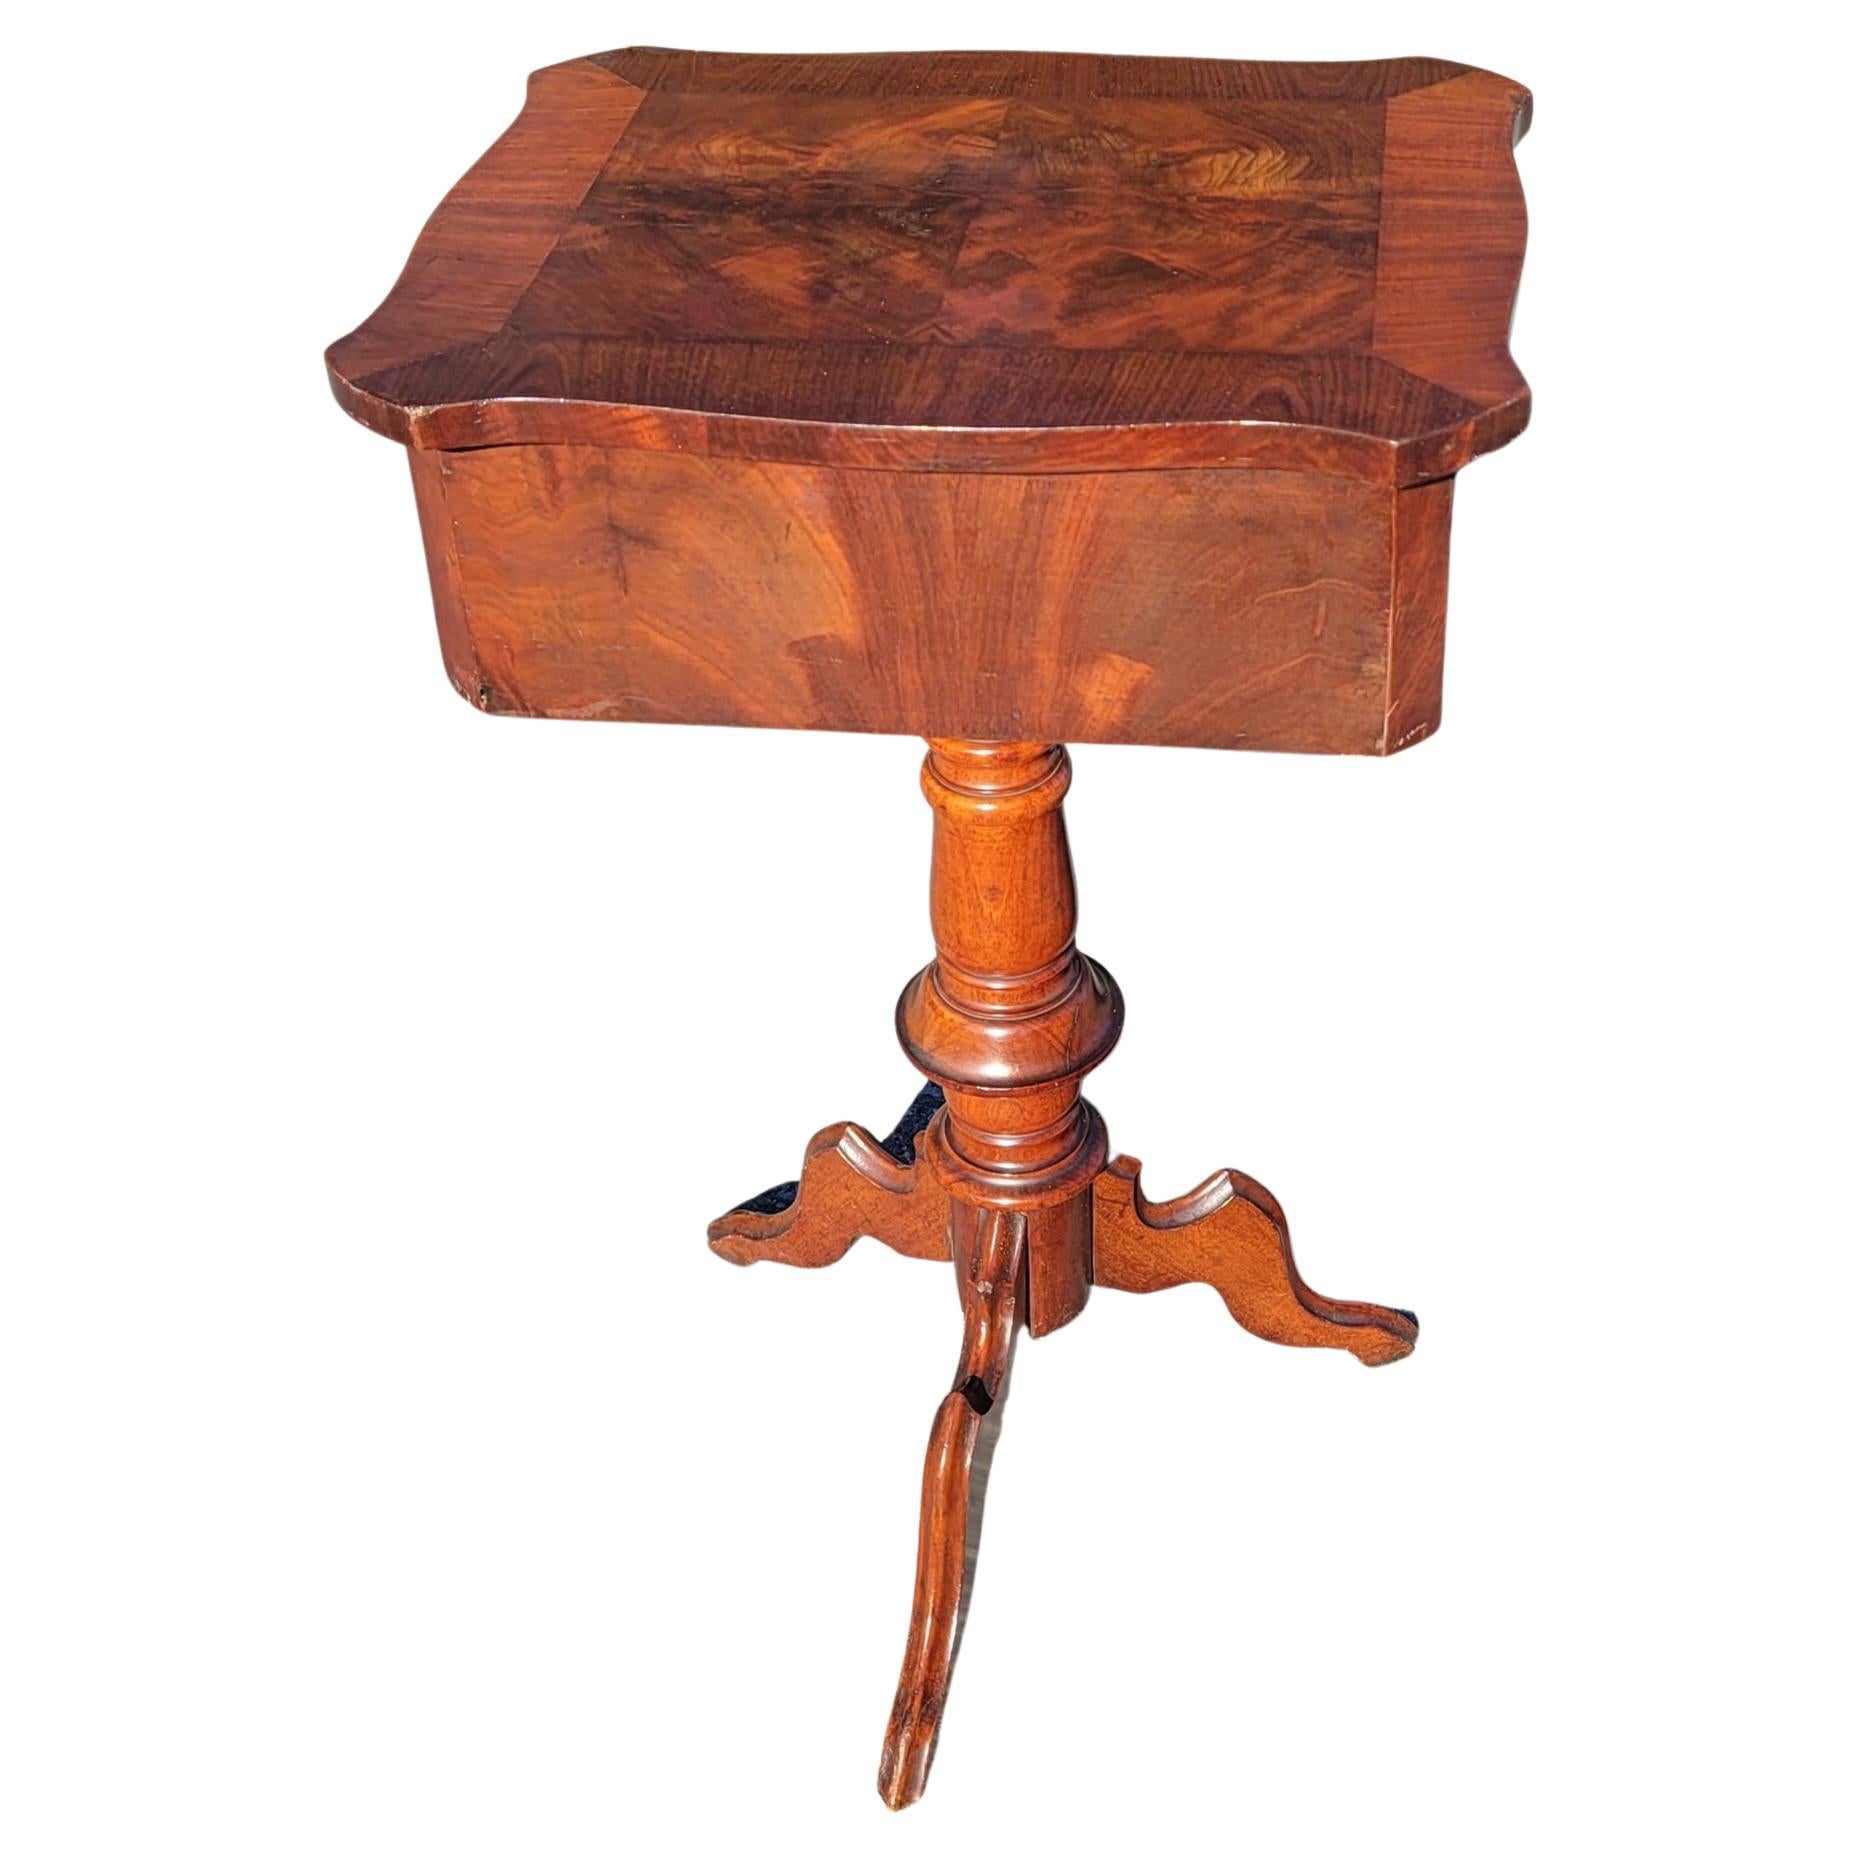 19th Century Biedermeier Flame Mahogany Pedestal 2-Drawer Side Table / Sewing Table, C. 1840 For Sale